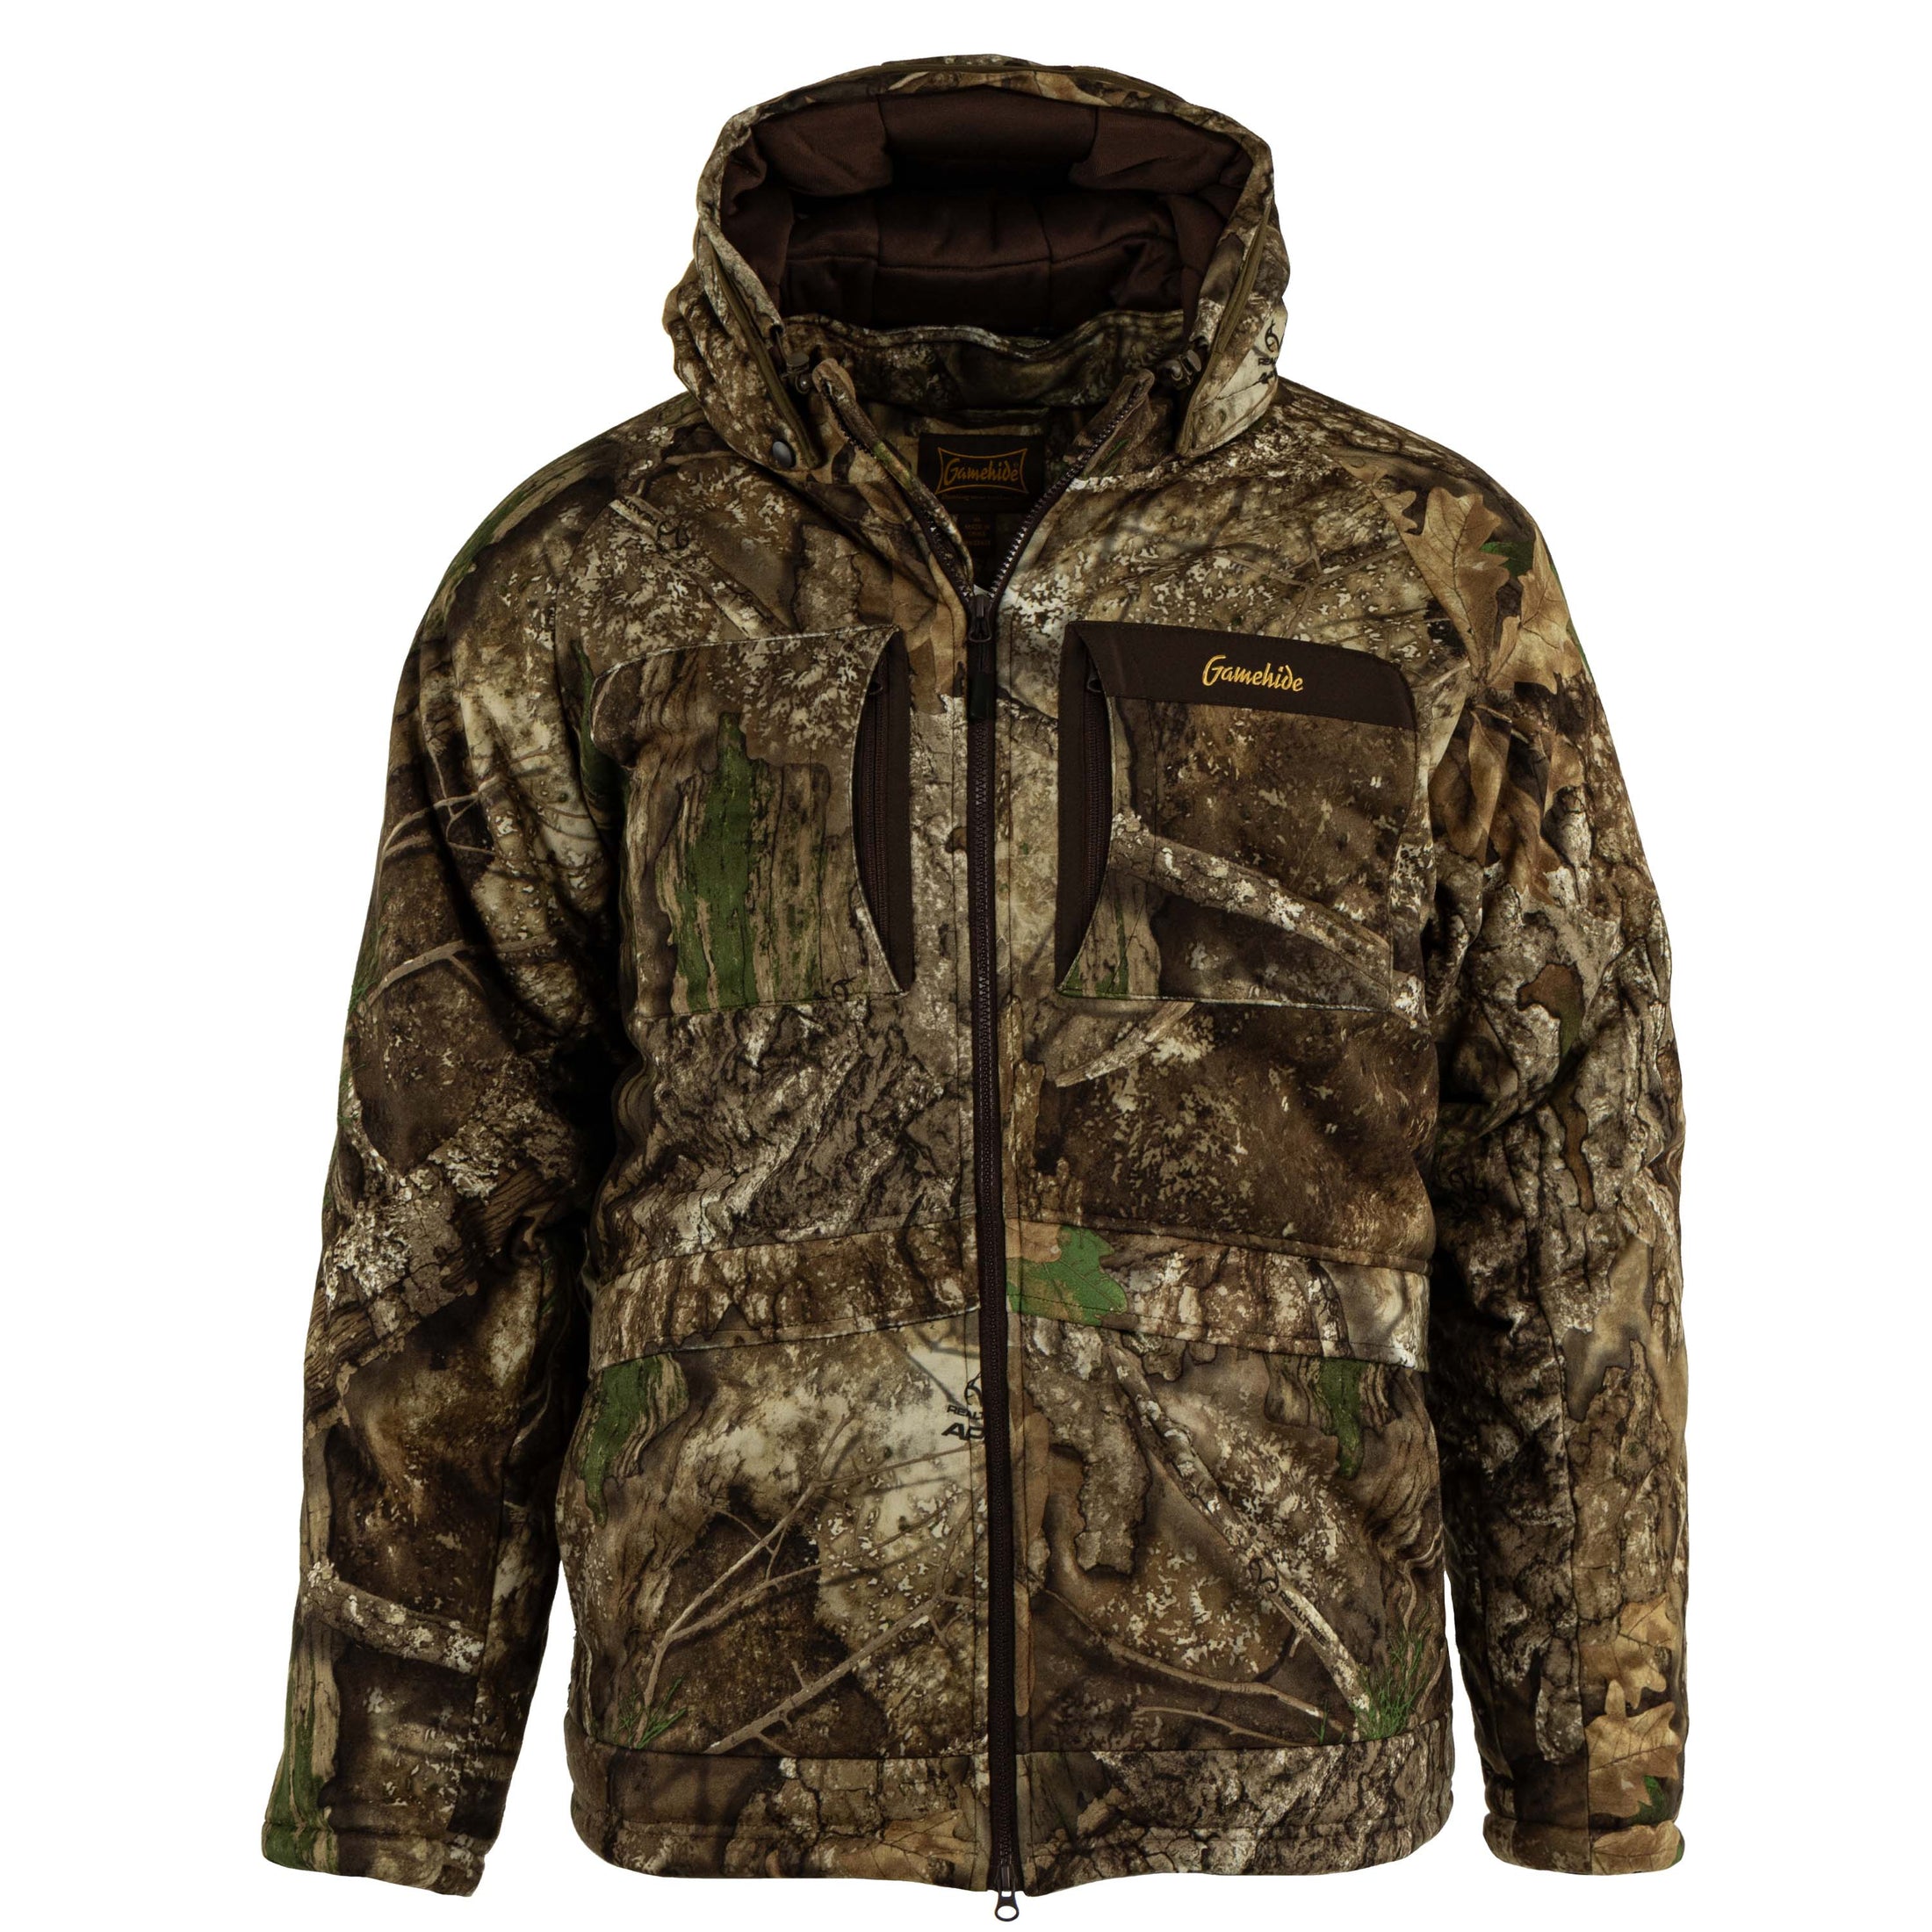 Embers Edge parka with hood down - front view (realtree apx)